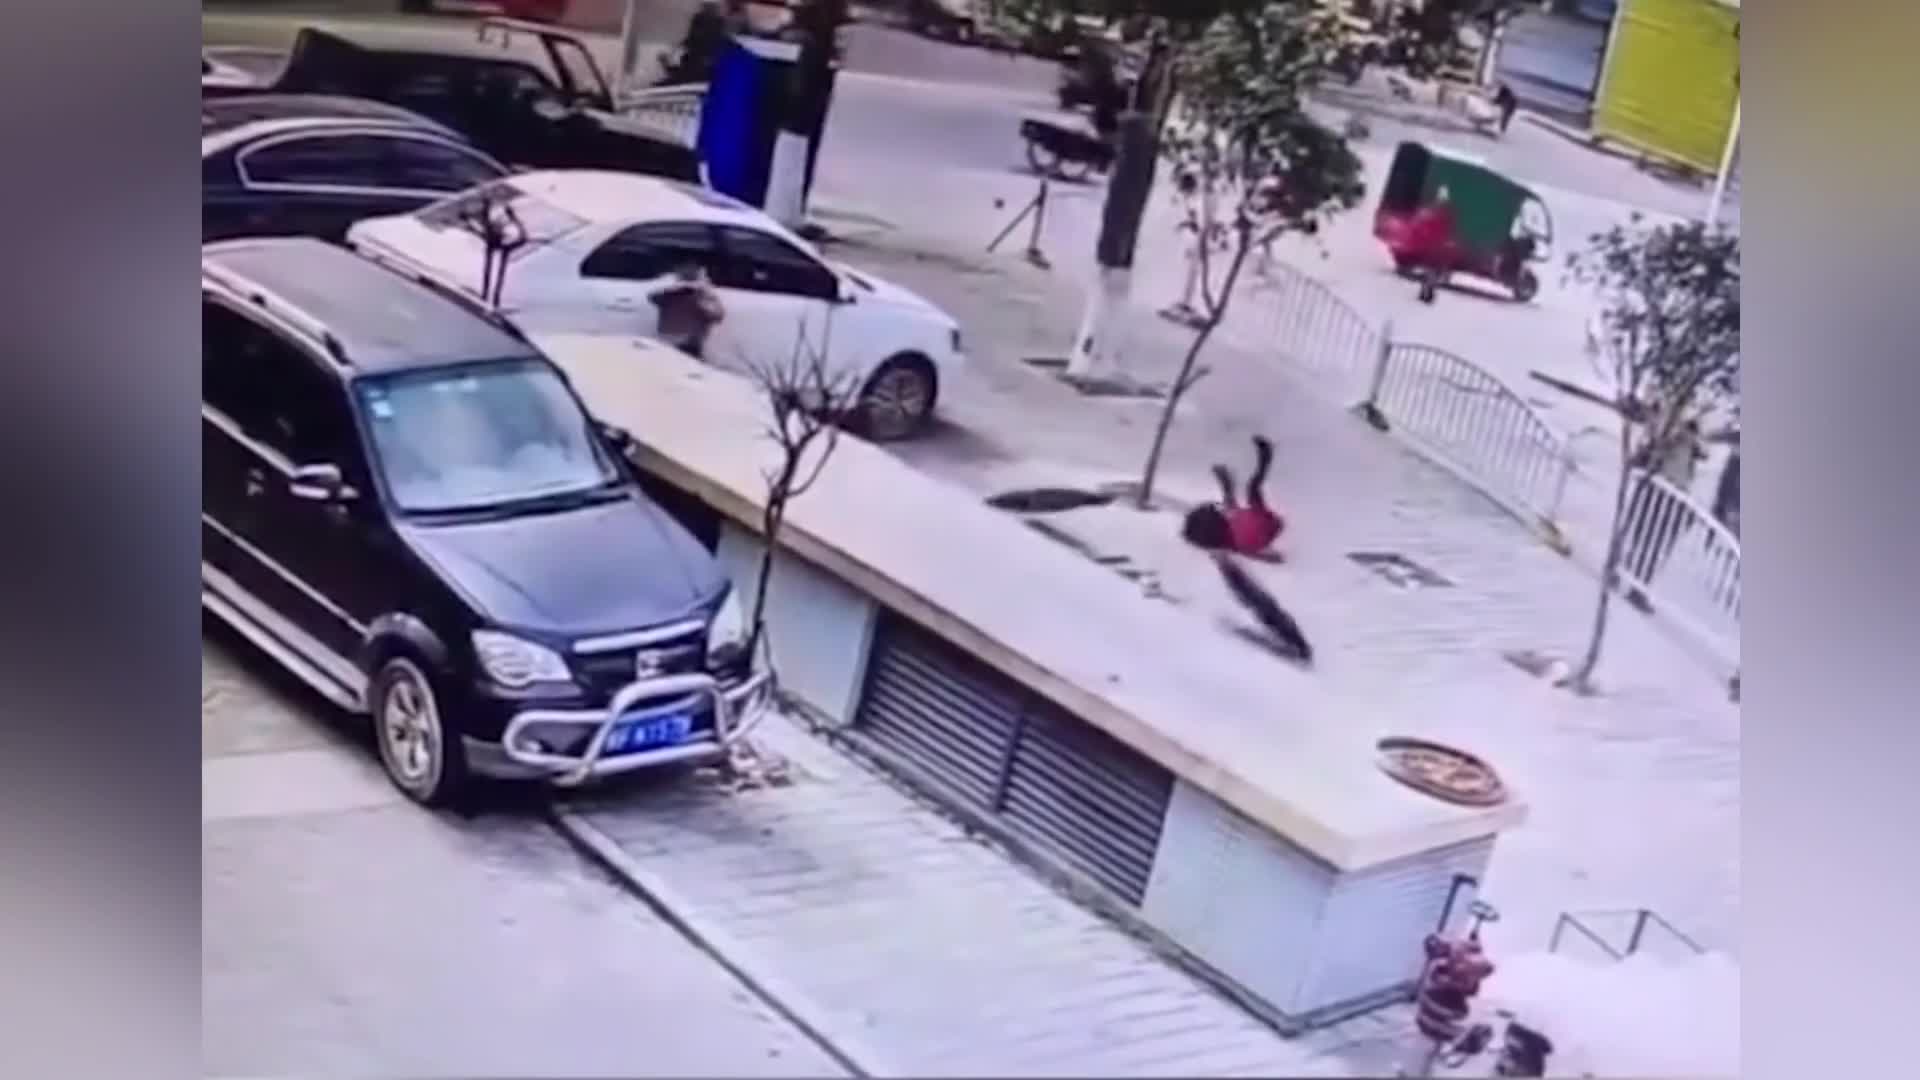 Newsflare - Manhole explosion sends boy into air after he throws lit firecracker inside in southern China